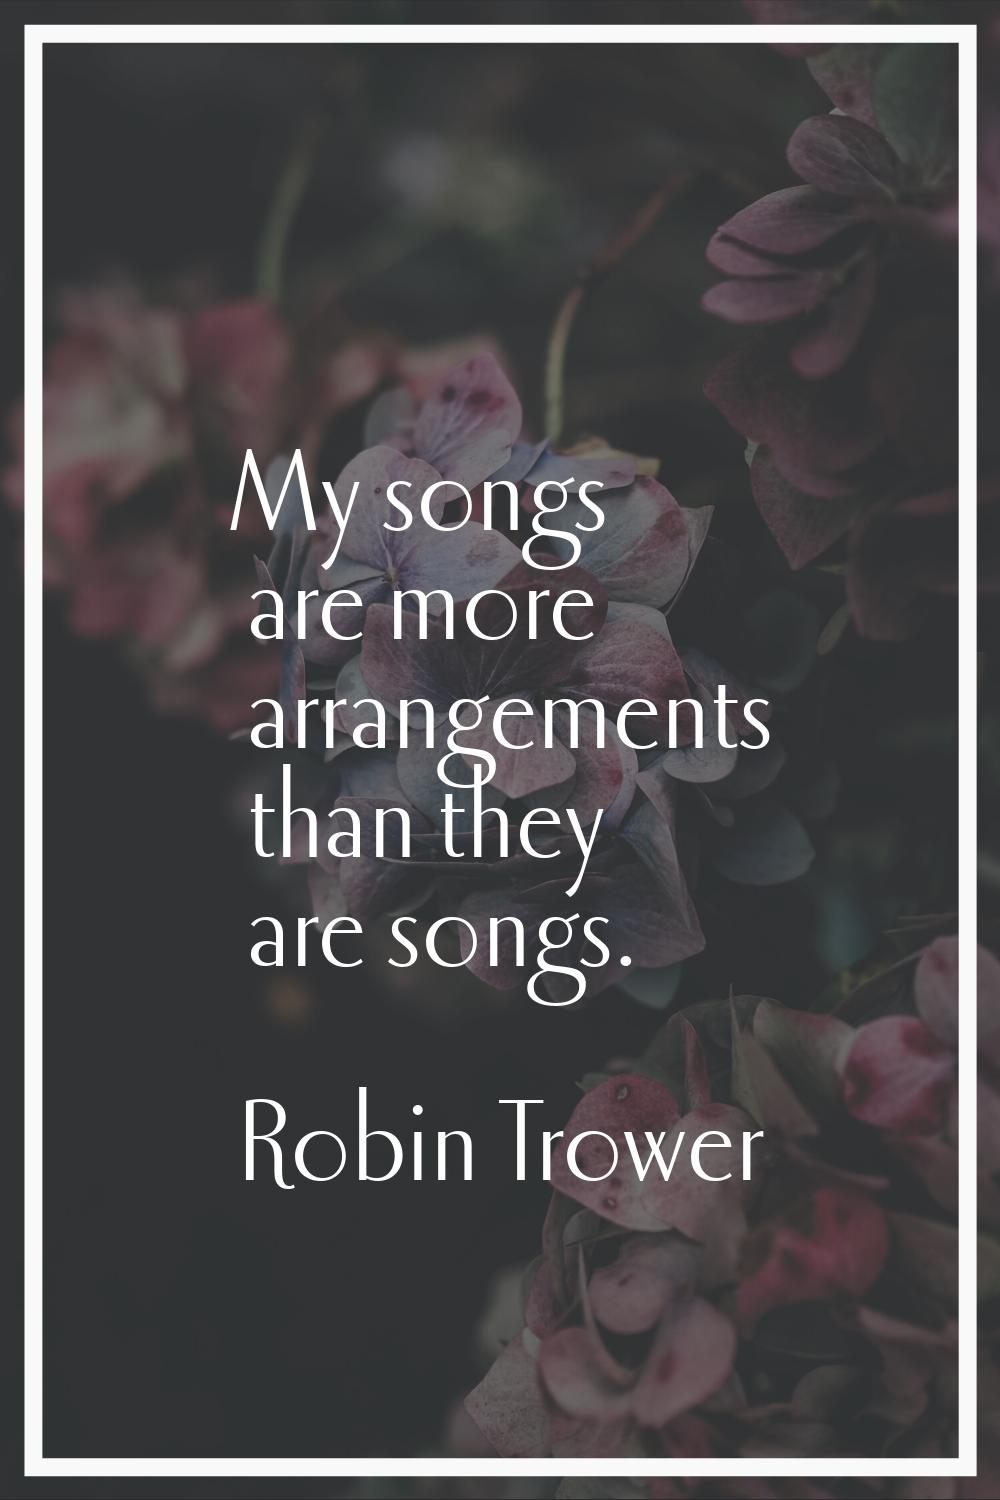 My songs are more arrangements than they are songs.